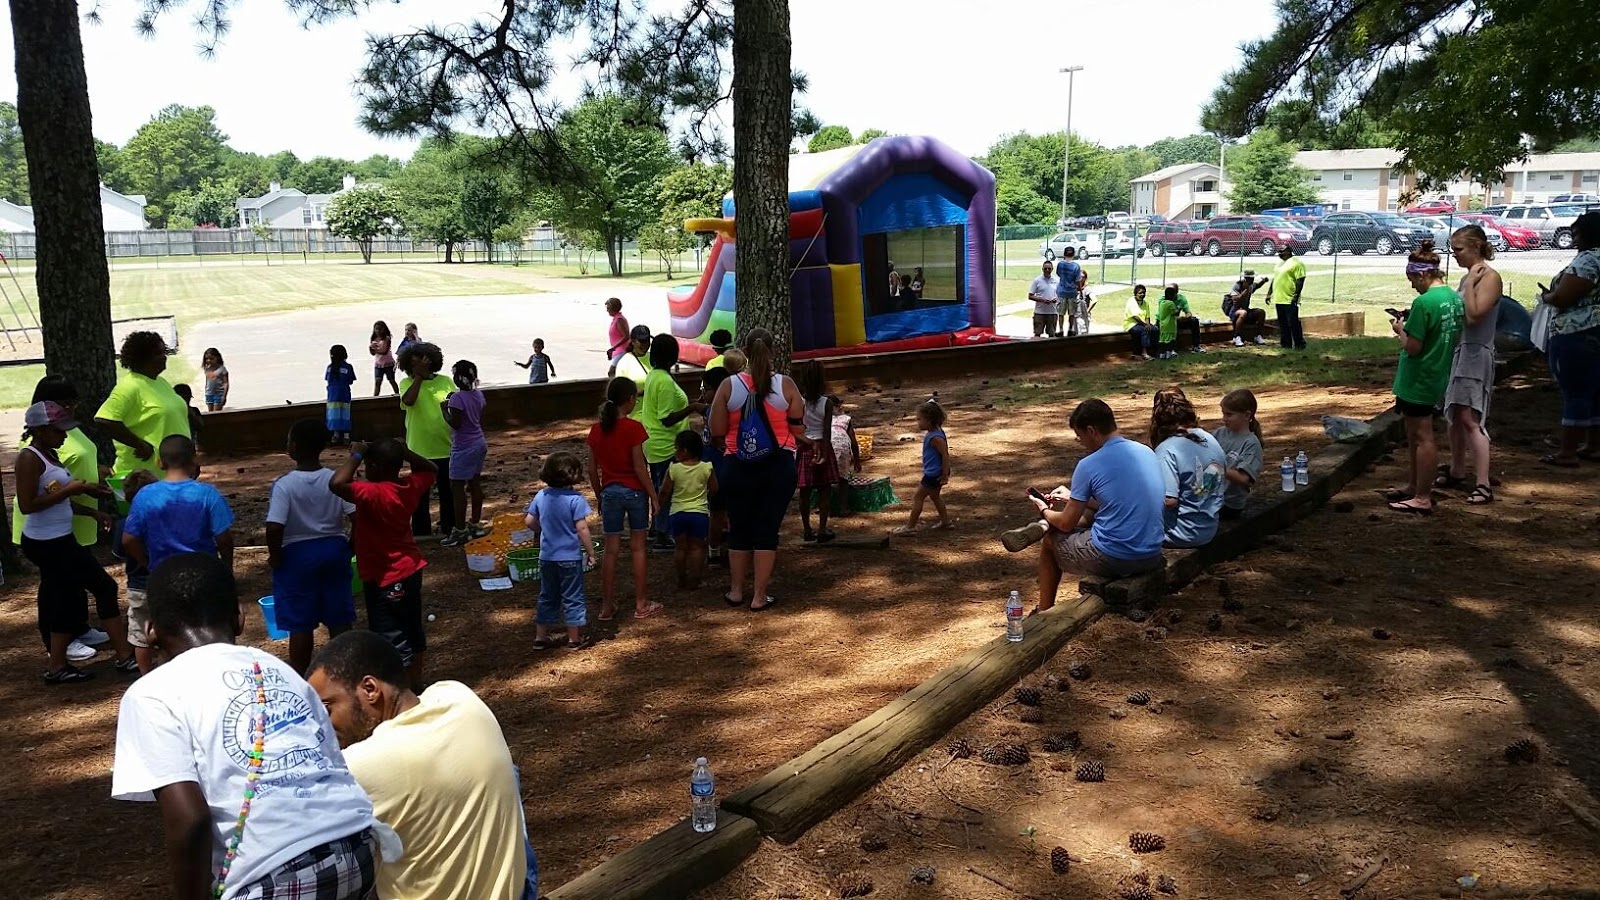 West Madison Elementary School: Welcome Back to School Community Outreach was a Blast!